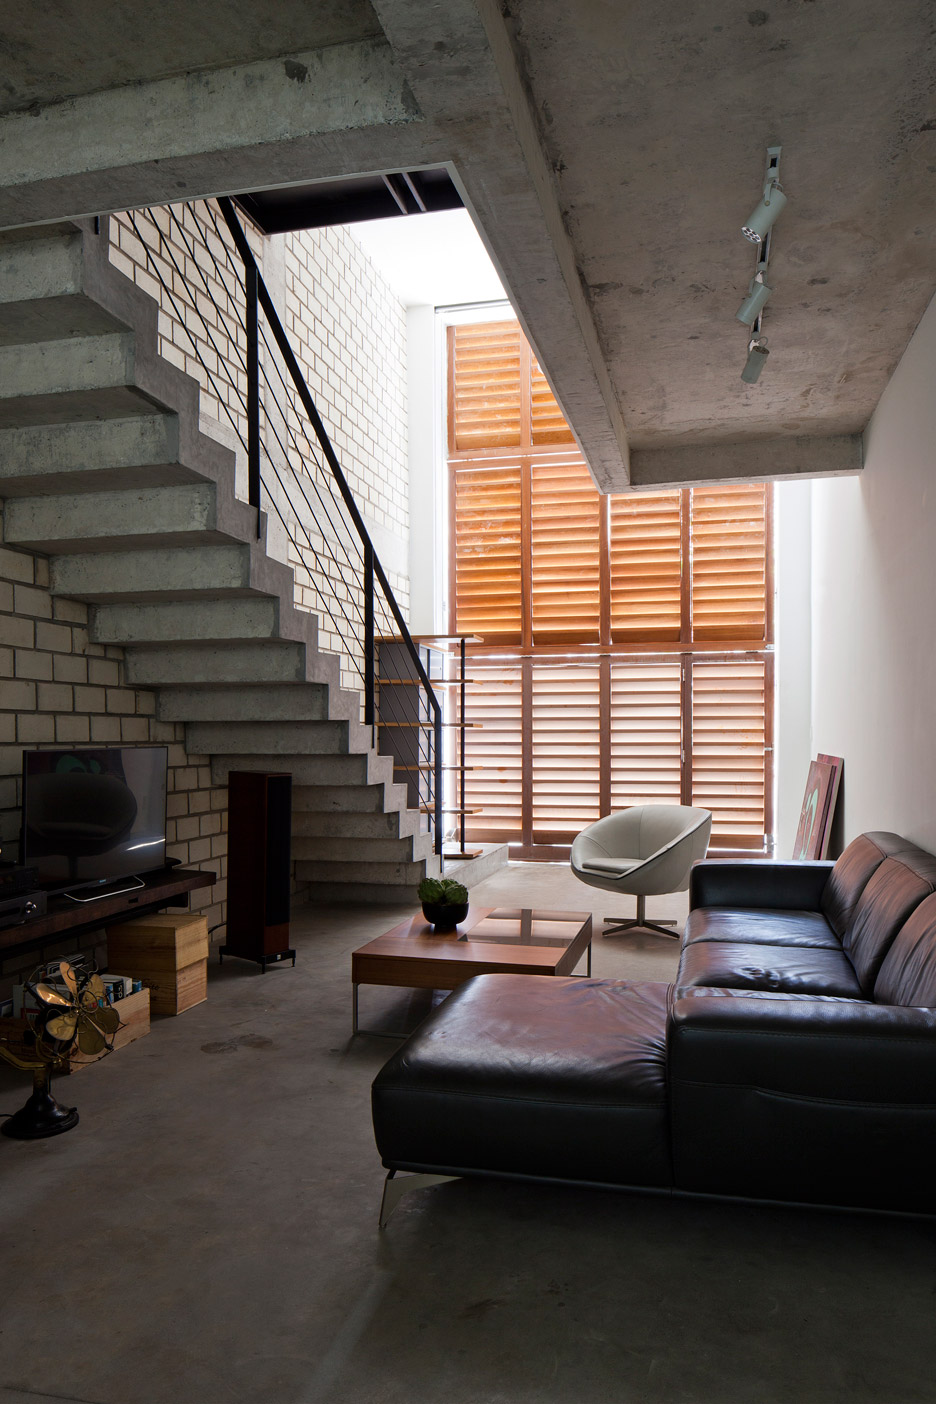 Townhouse with a folding-up shutter in Vietnam by MM++ Architects